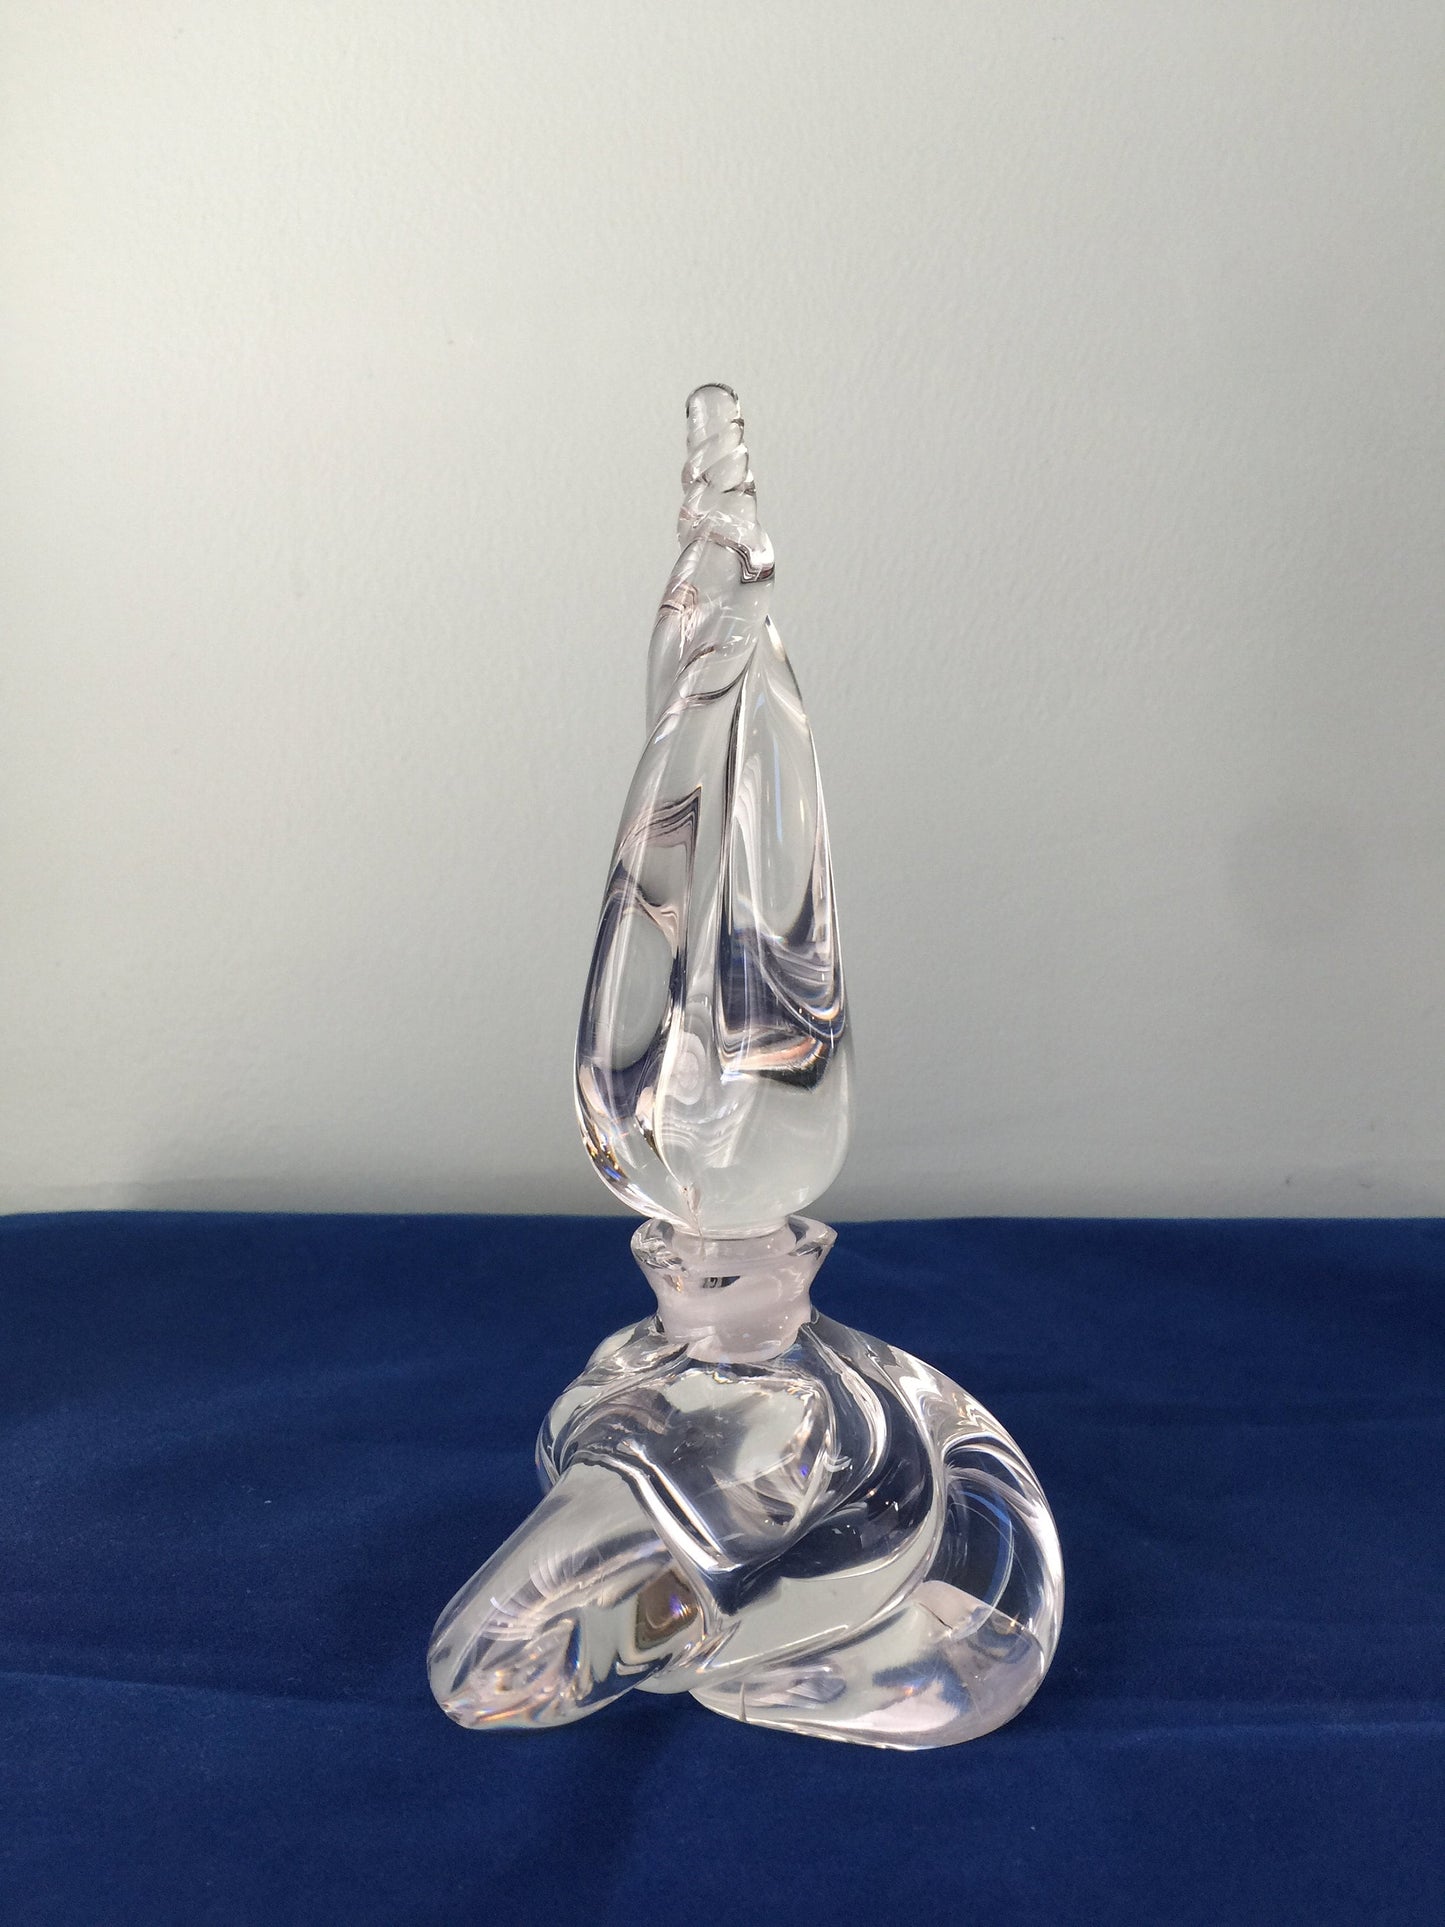 Crystal Perfume Bottle - Art Glass, Home Decor, Vanity Accessory, Collectible Glass with Stopper - Duckwells